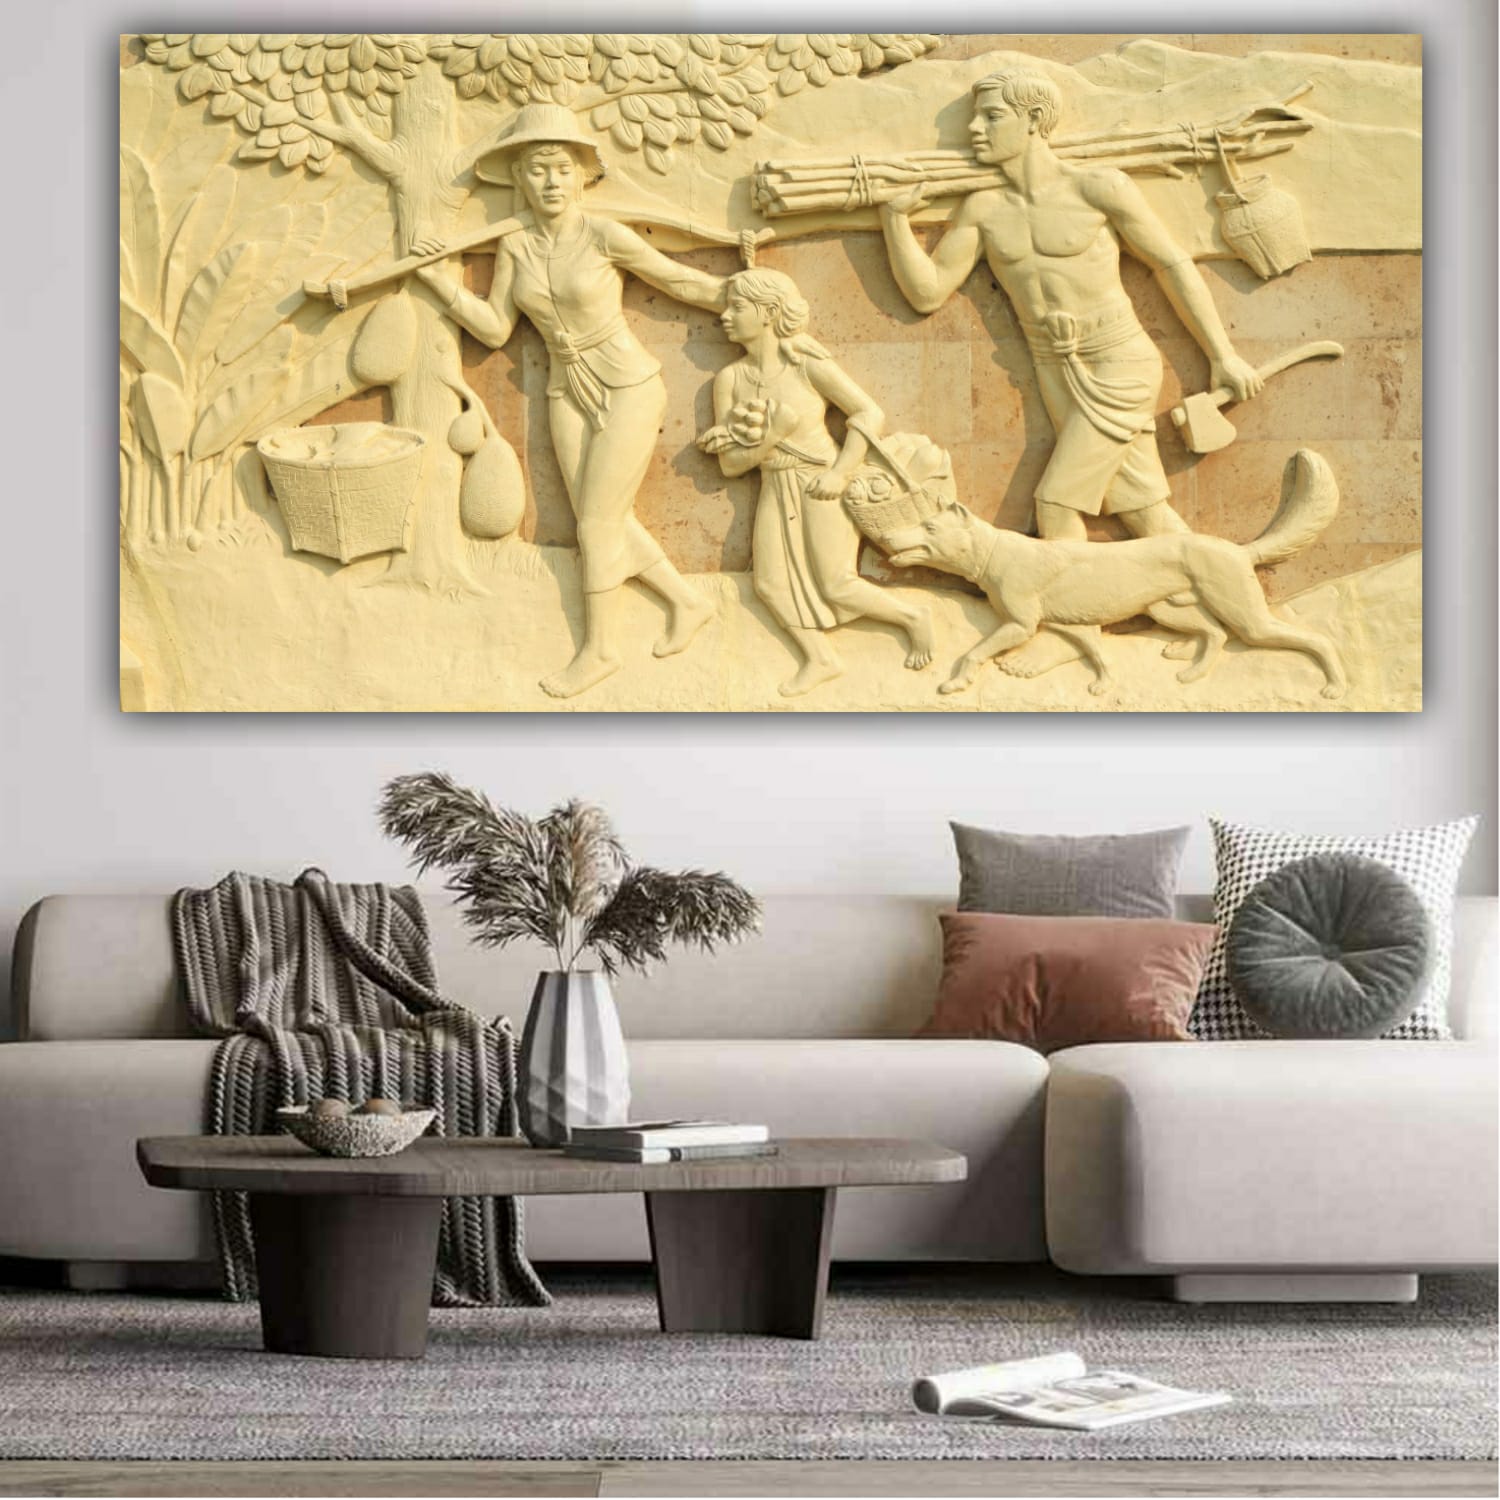 3D Canvas Painting A Farmer's Family Wall Frame for Living Room Wall Decoration 